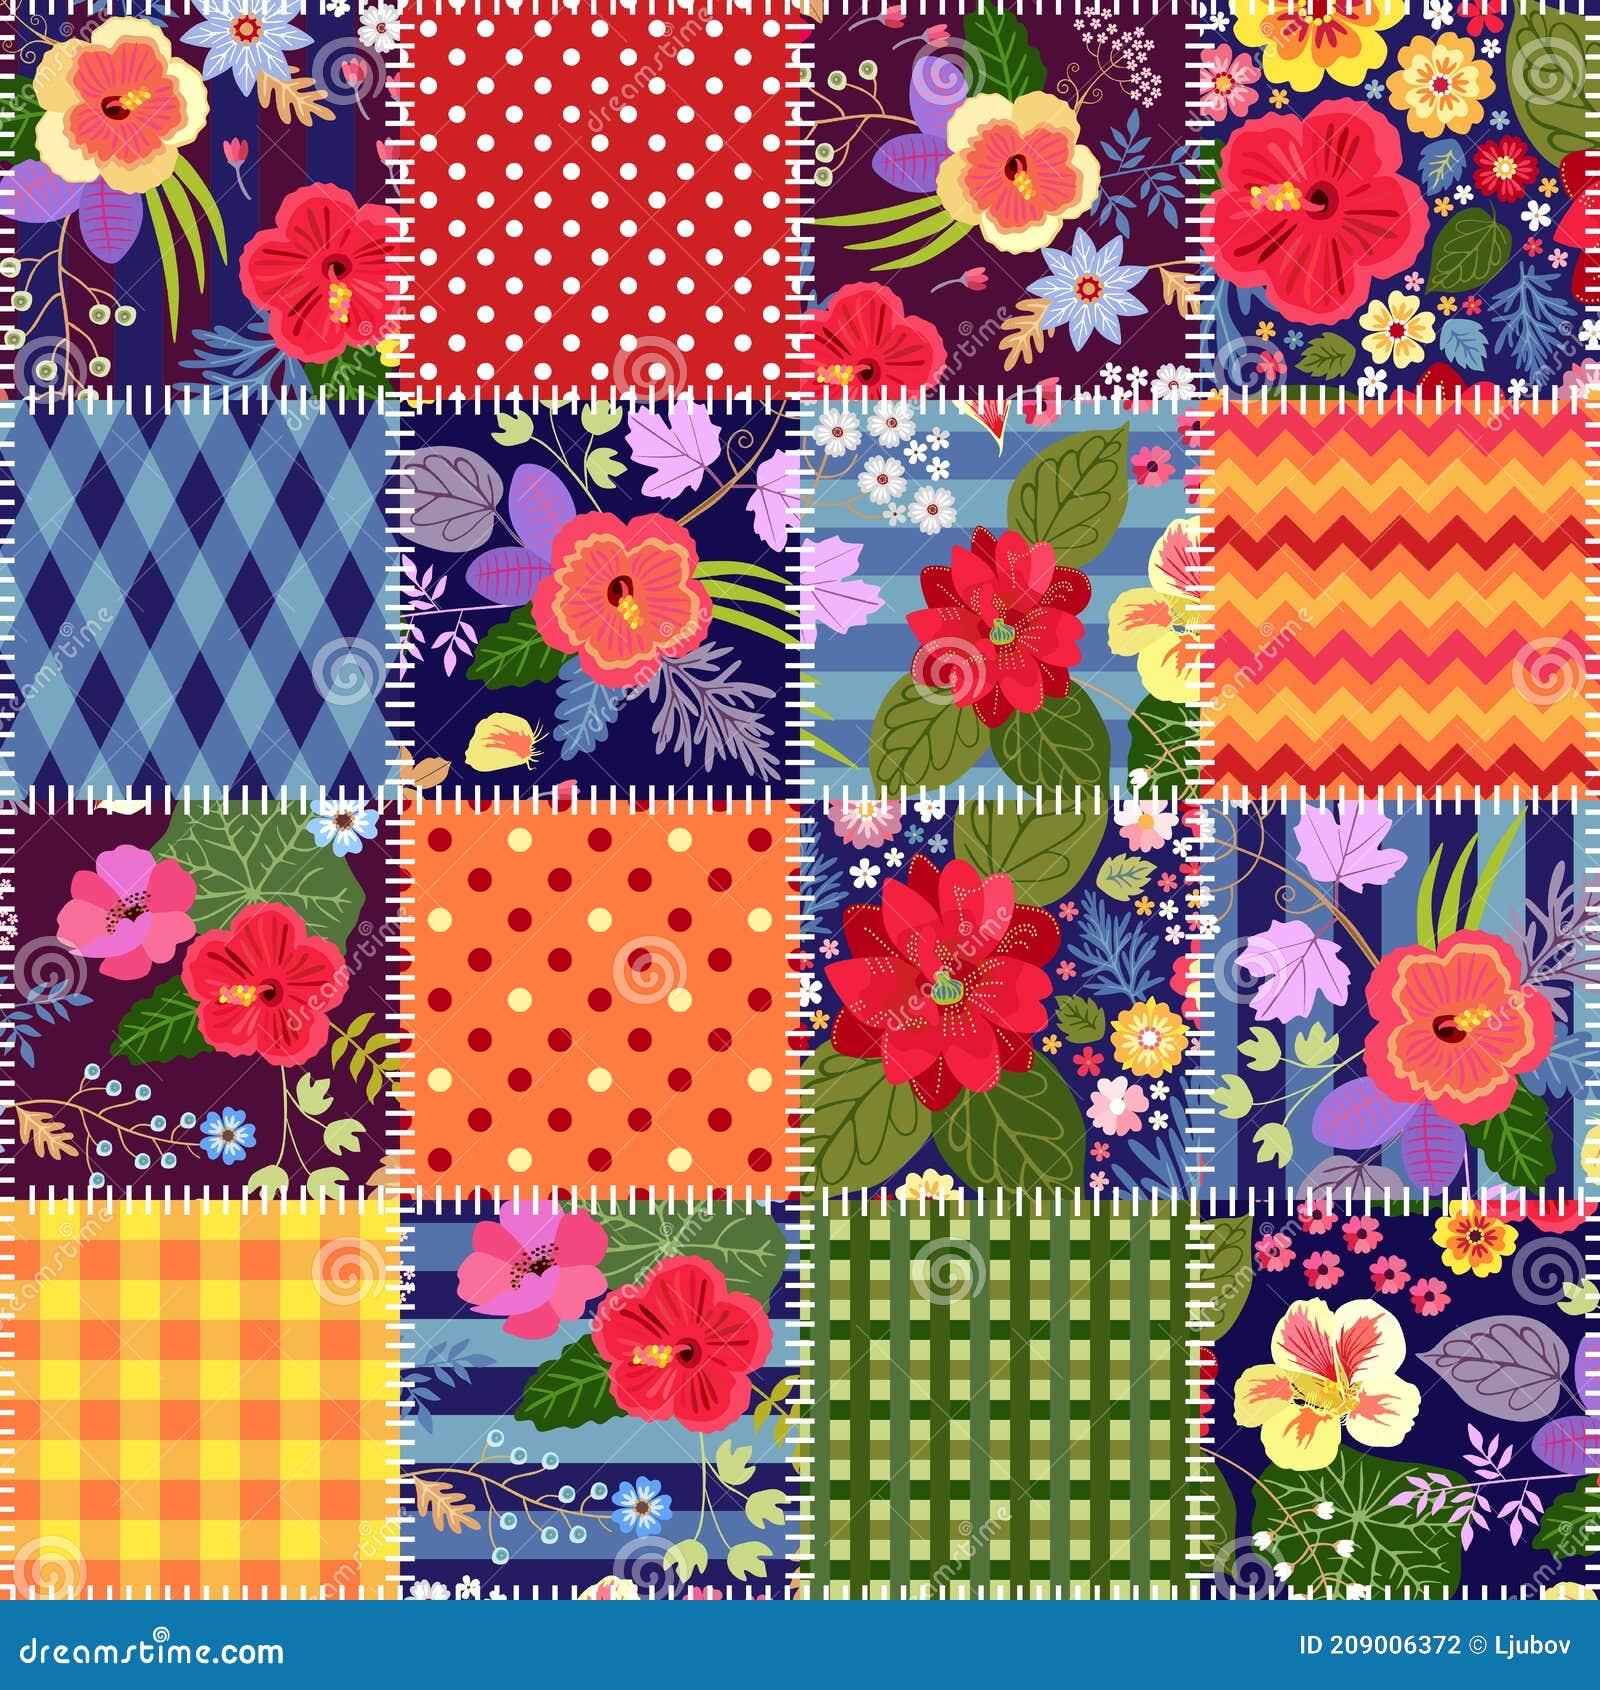 colorful seamless patchwork pattern with bright tropical flowers and geometric ornaments. quilt  from stitched squares